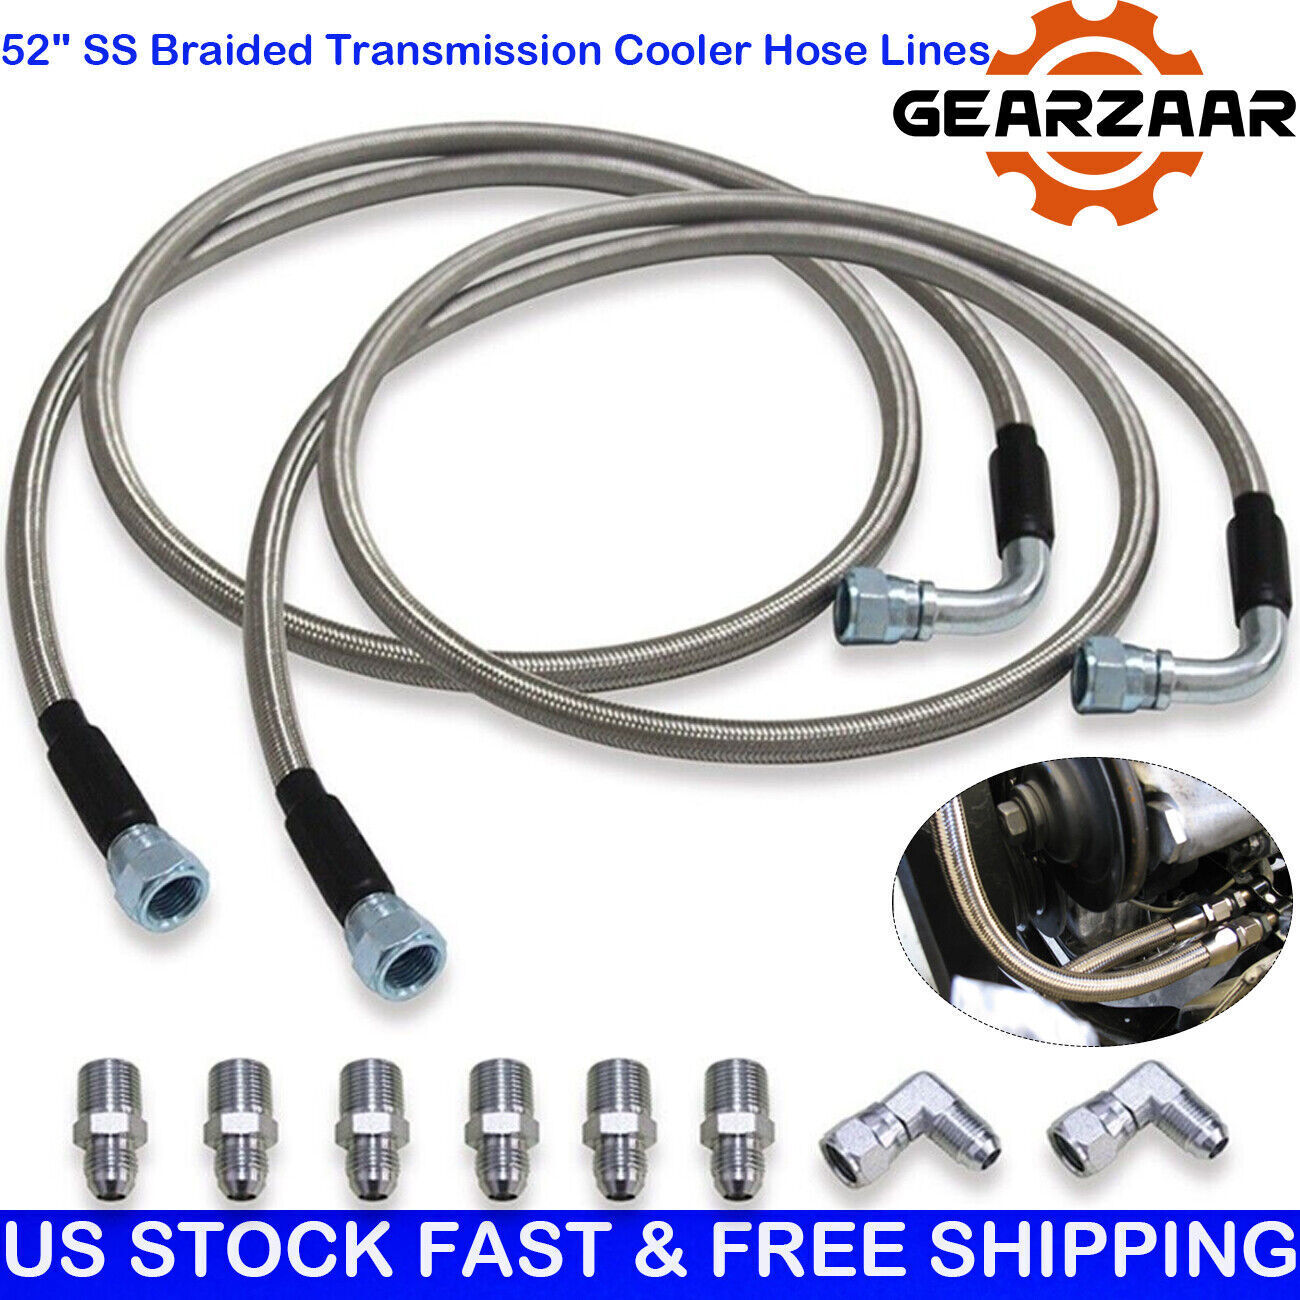 SS Braided Transmission Cooler Hose lines Fittings TH350 700R4 TH400 52\